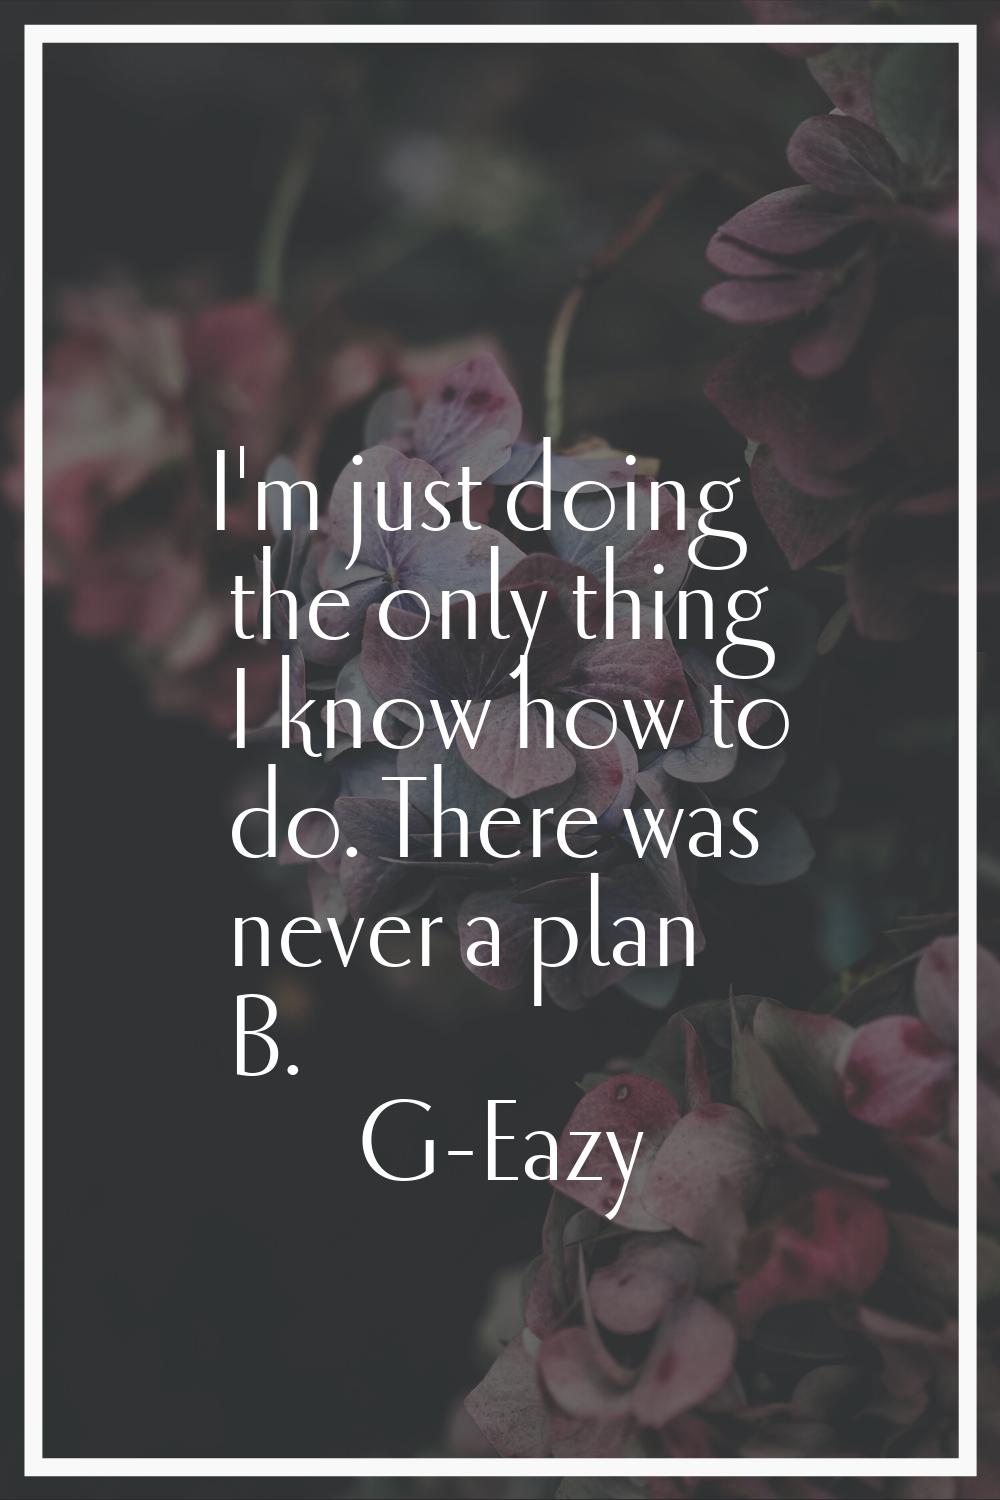 I'm just doing the only thing I know how to do. There was never a plan B.